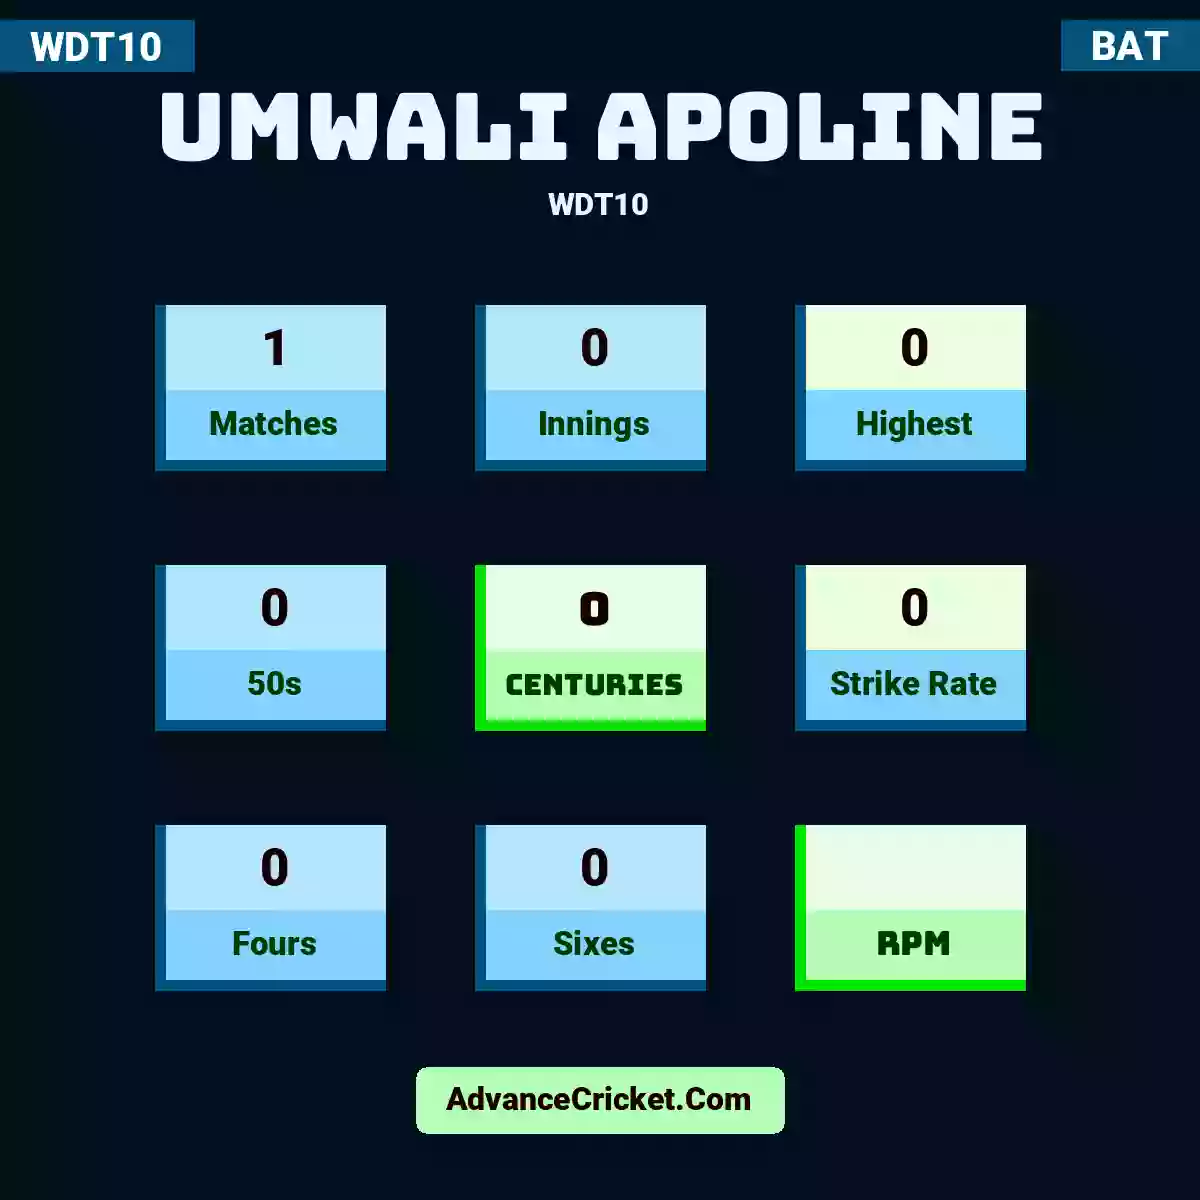 Umwali Apoline WDT10 , Umwali Apoline played 1 matches, scored 0 runs as highest, 0 half-centuries, and 0 centuries, with a strike rate of 0. U.Apoline hit 0 fours and 0 sixes.